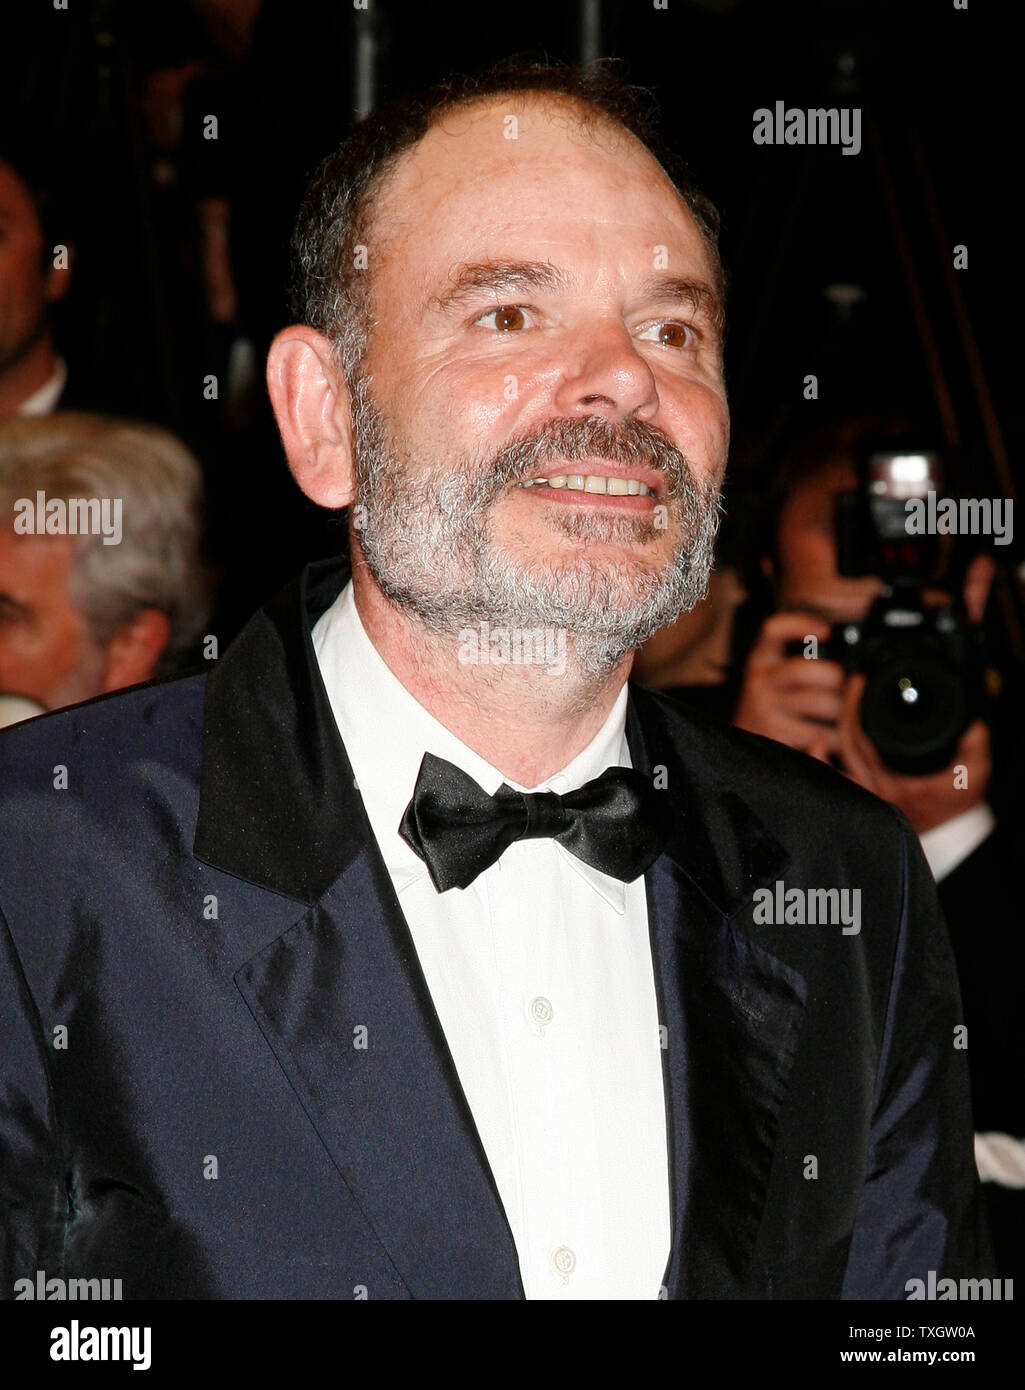 Actor Jean-Pierre Darroussin arrives on the red carpet before a screening of the film 'Two Lovers' during the 61st Annual Cannes Film Festival in Cannes, France on May 19, 2008.   (UPI Photo/David Silpa) Stock Photo